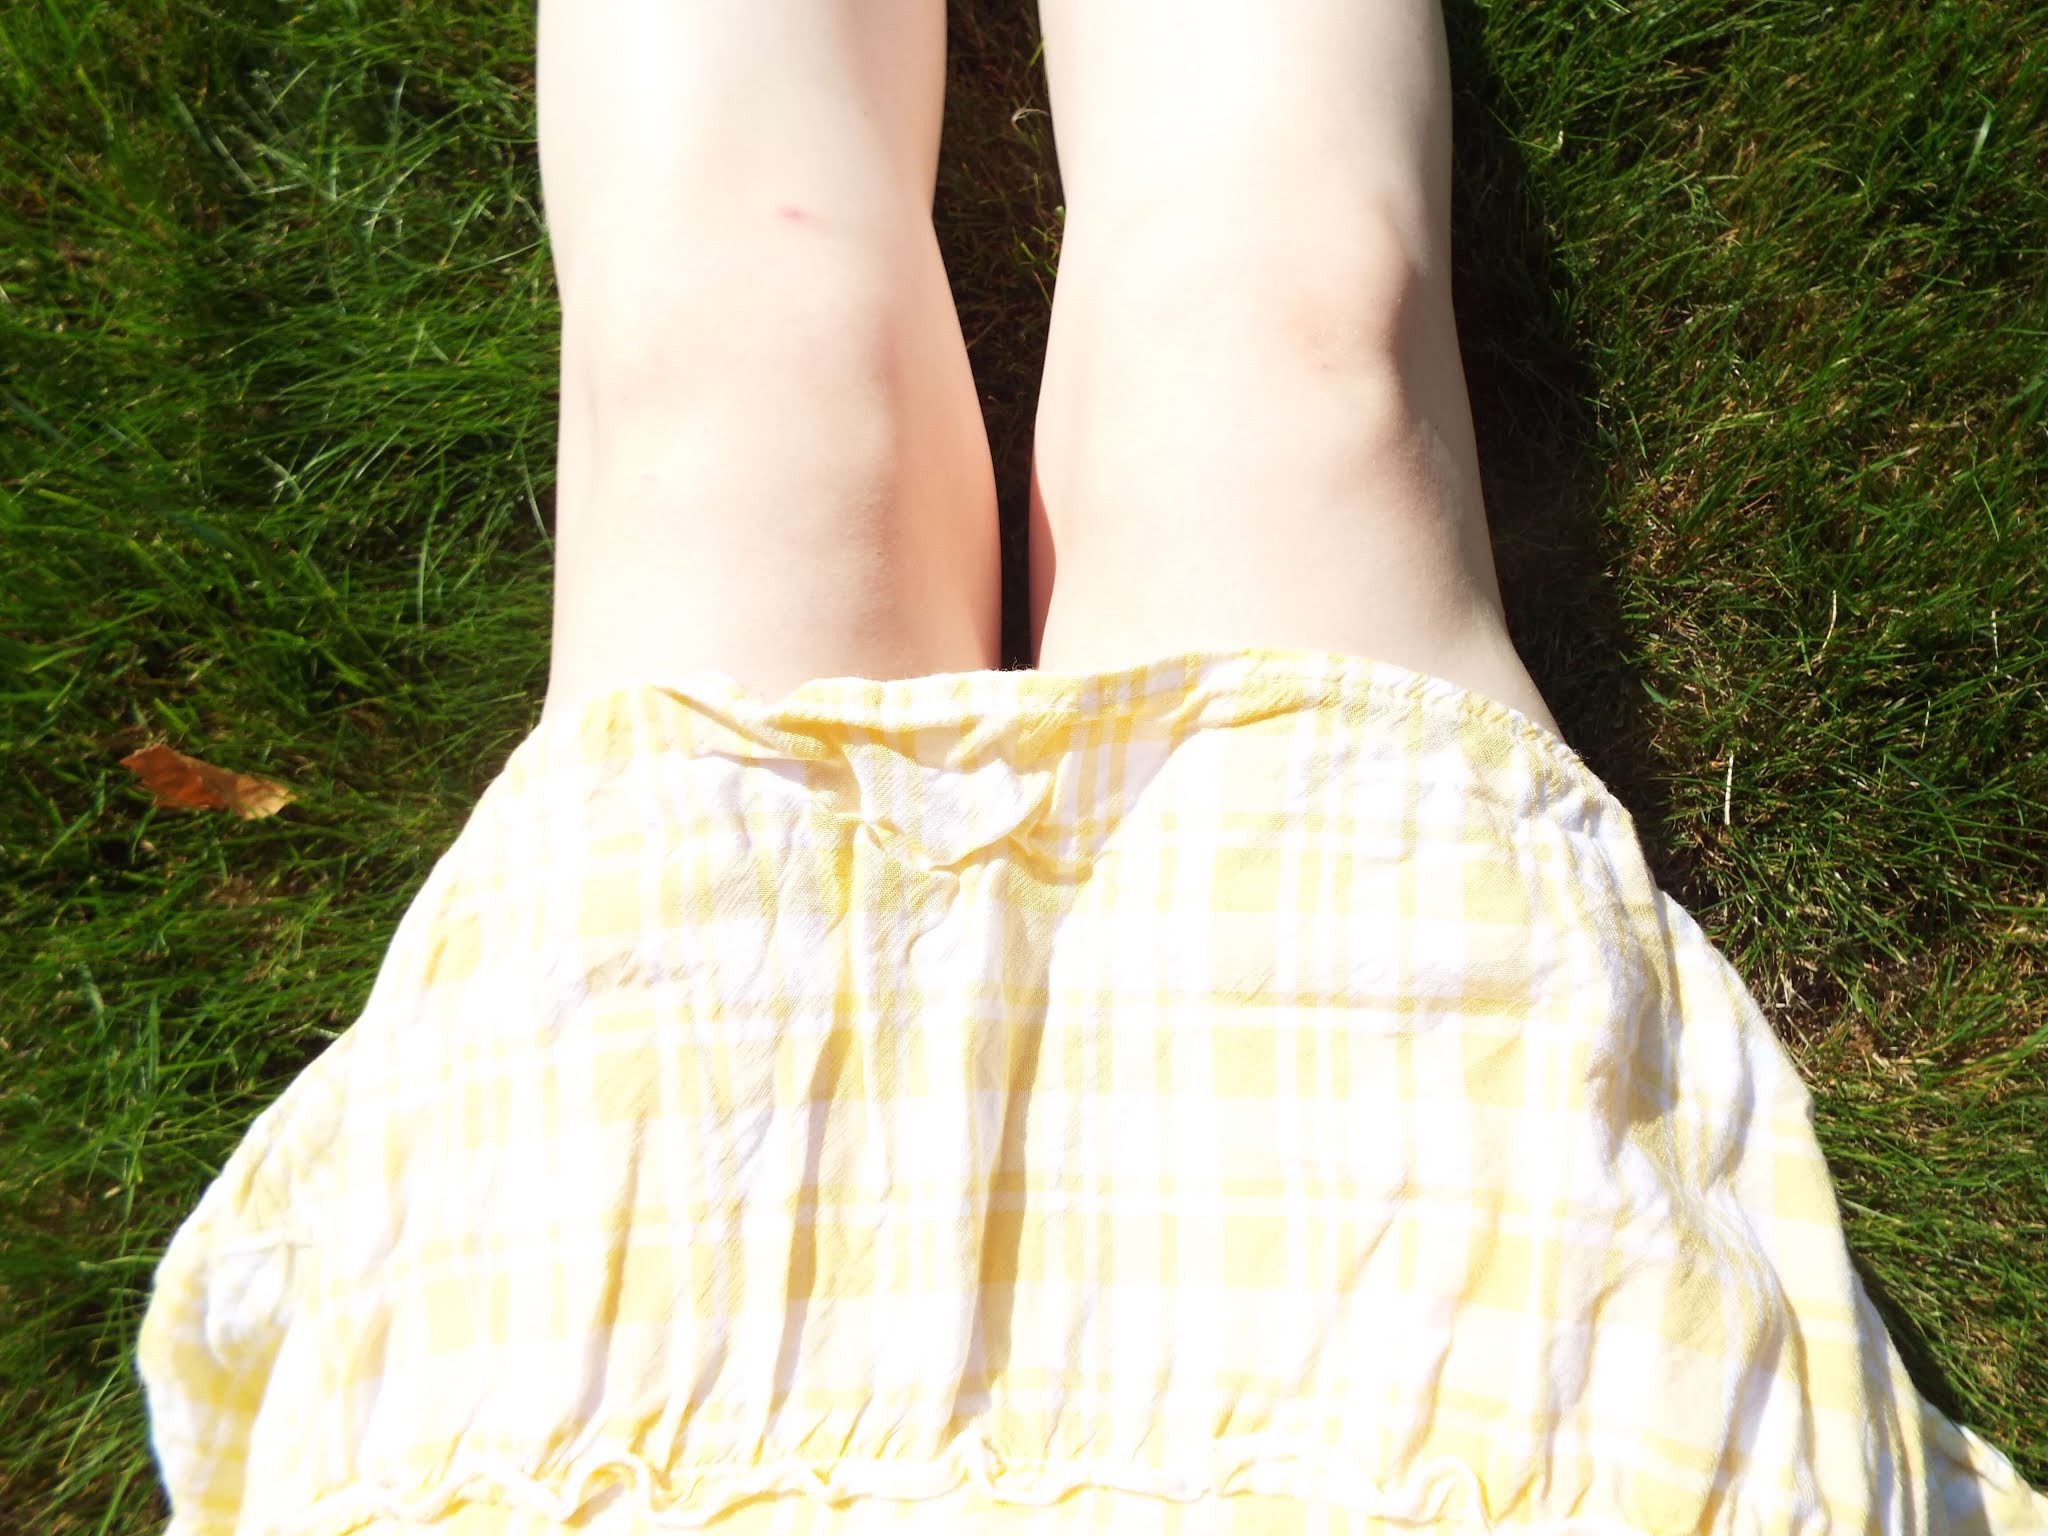 Sitting on the grass on a bright, sunny day, with legs stretched in front and my yellow gingham dress resting over my legs, just above my knees.